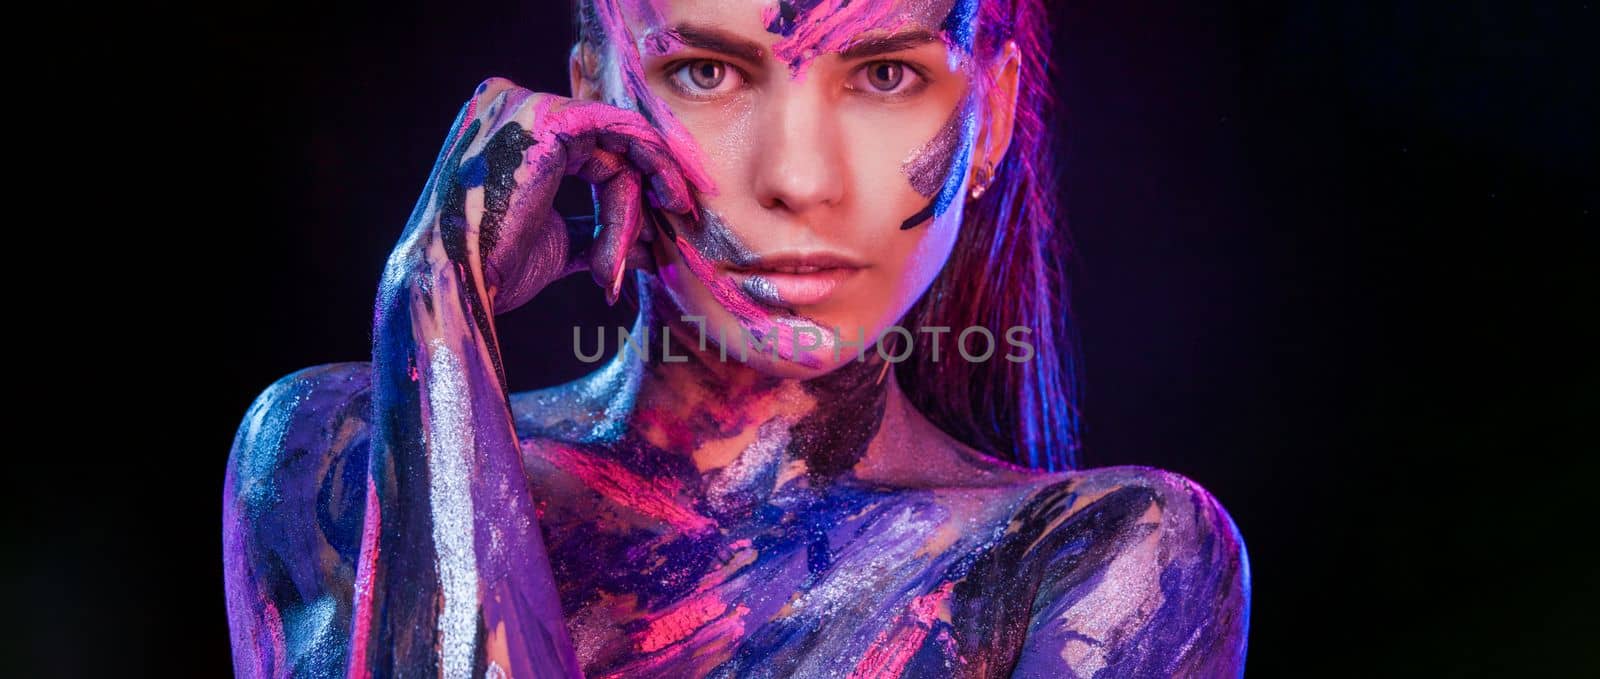 Woman in neon lights. Portrait of dancer at club party. Body art with bodypaint. Download cover for art book. by MikeOrlov